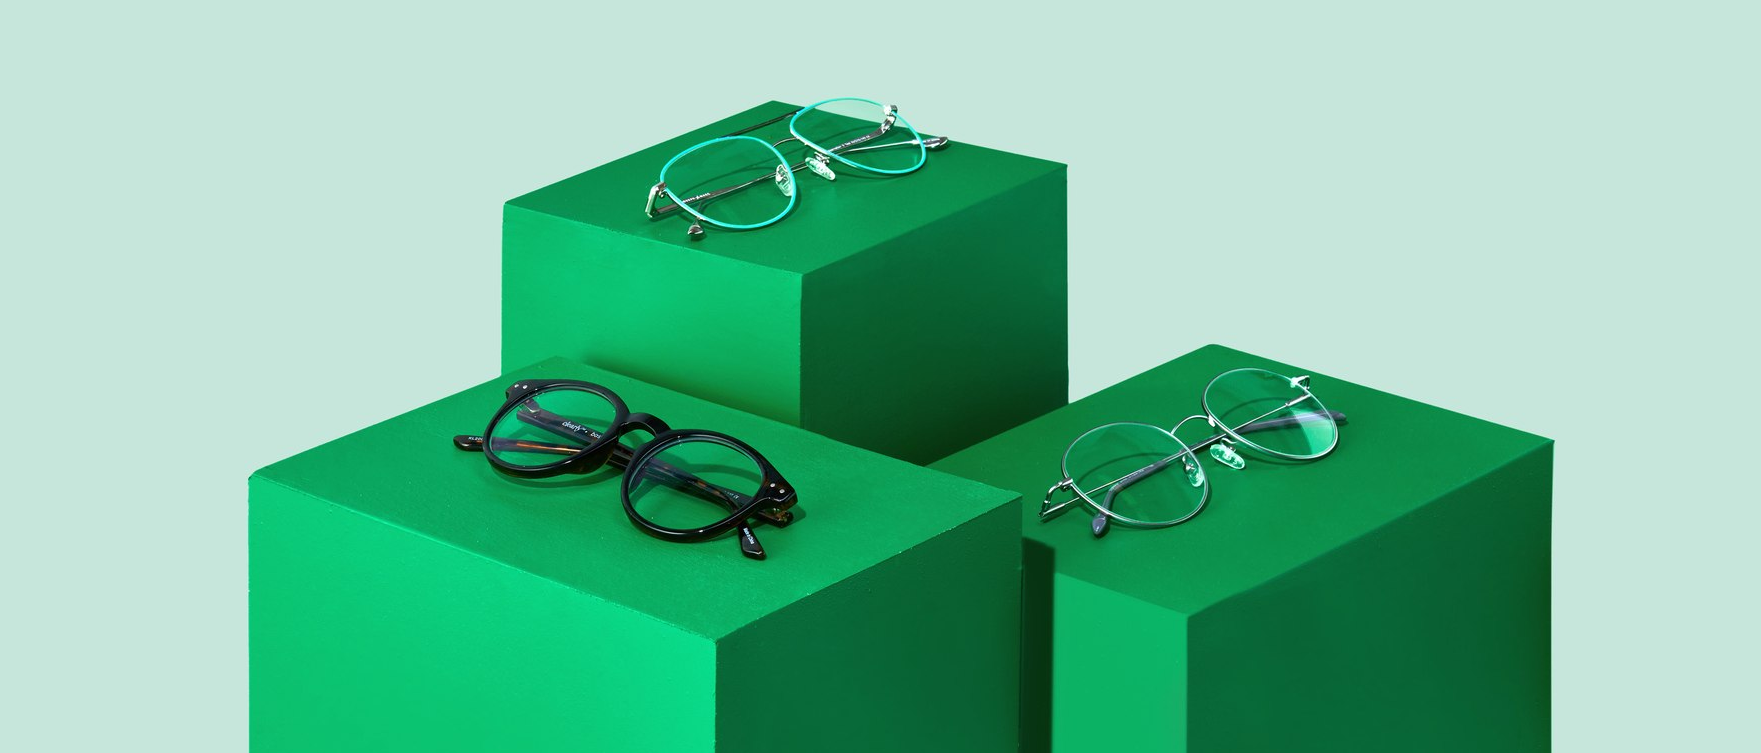 35% off + free shipping  on your first pair when you sign up at Clearly